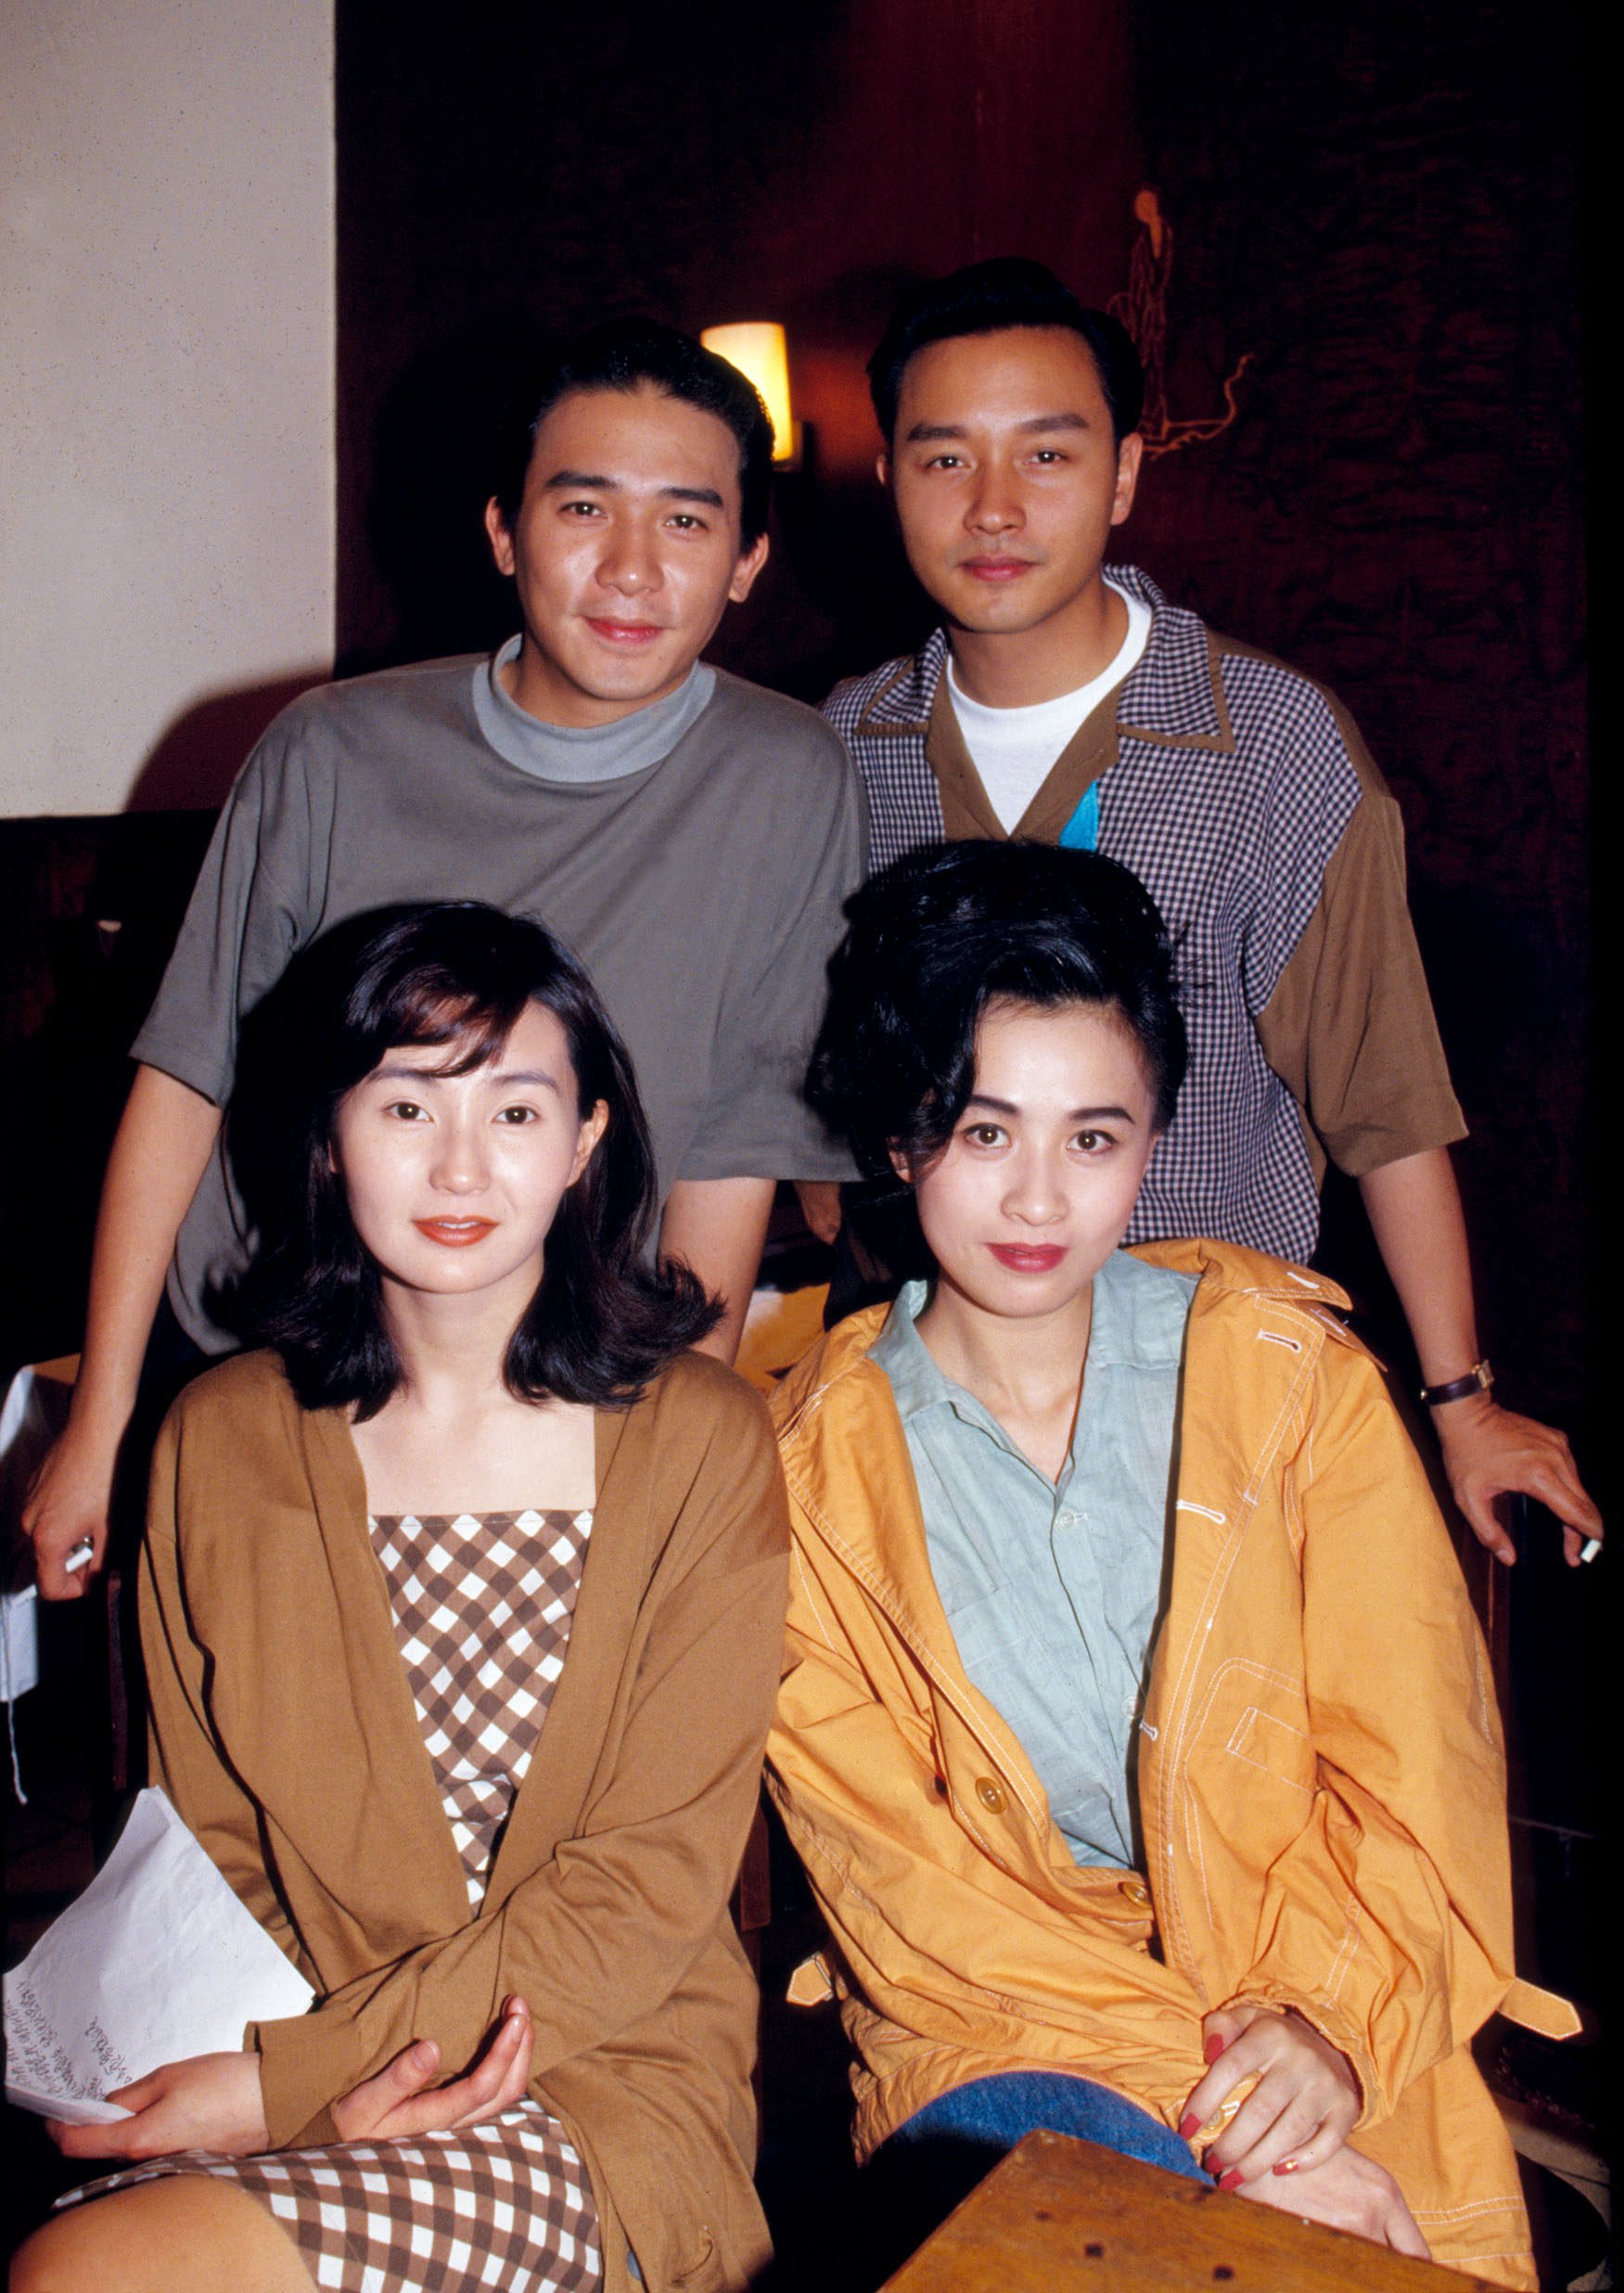 Leslie Cheung, Carina Lau, Maggie Cheung and Tony Leung in Wong Kar-wai’s film Days of Being Wild in 1990. Photo: Michael Tsui